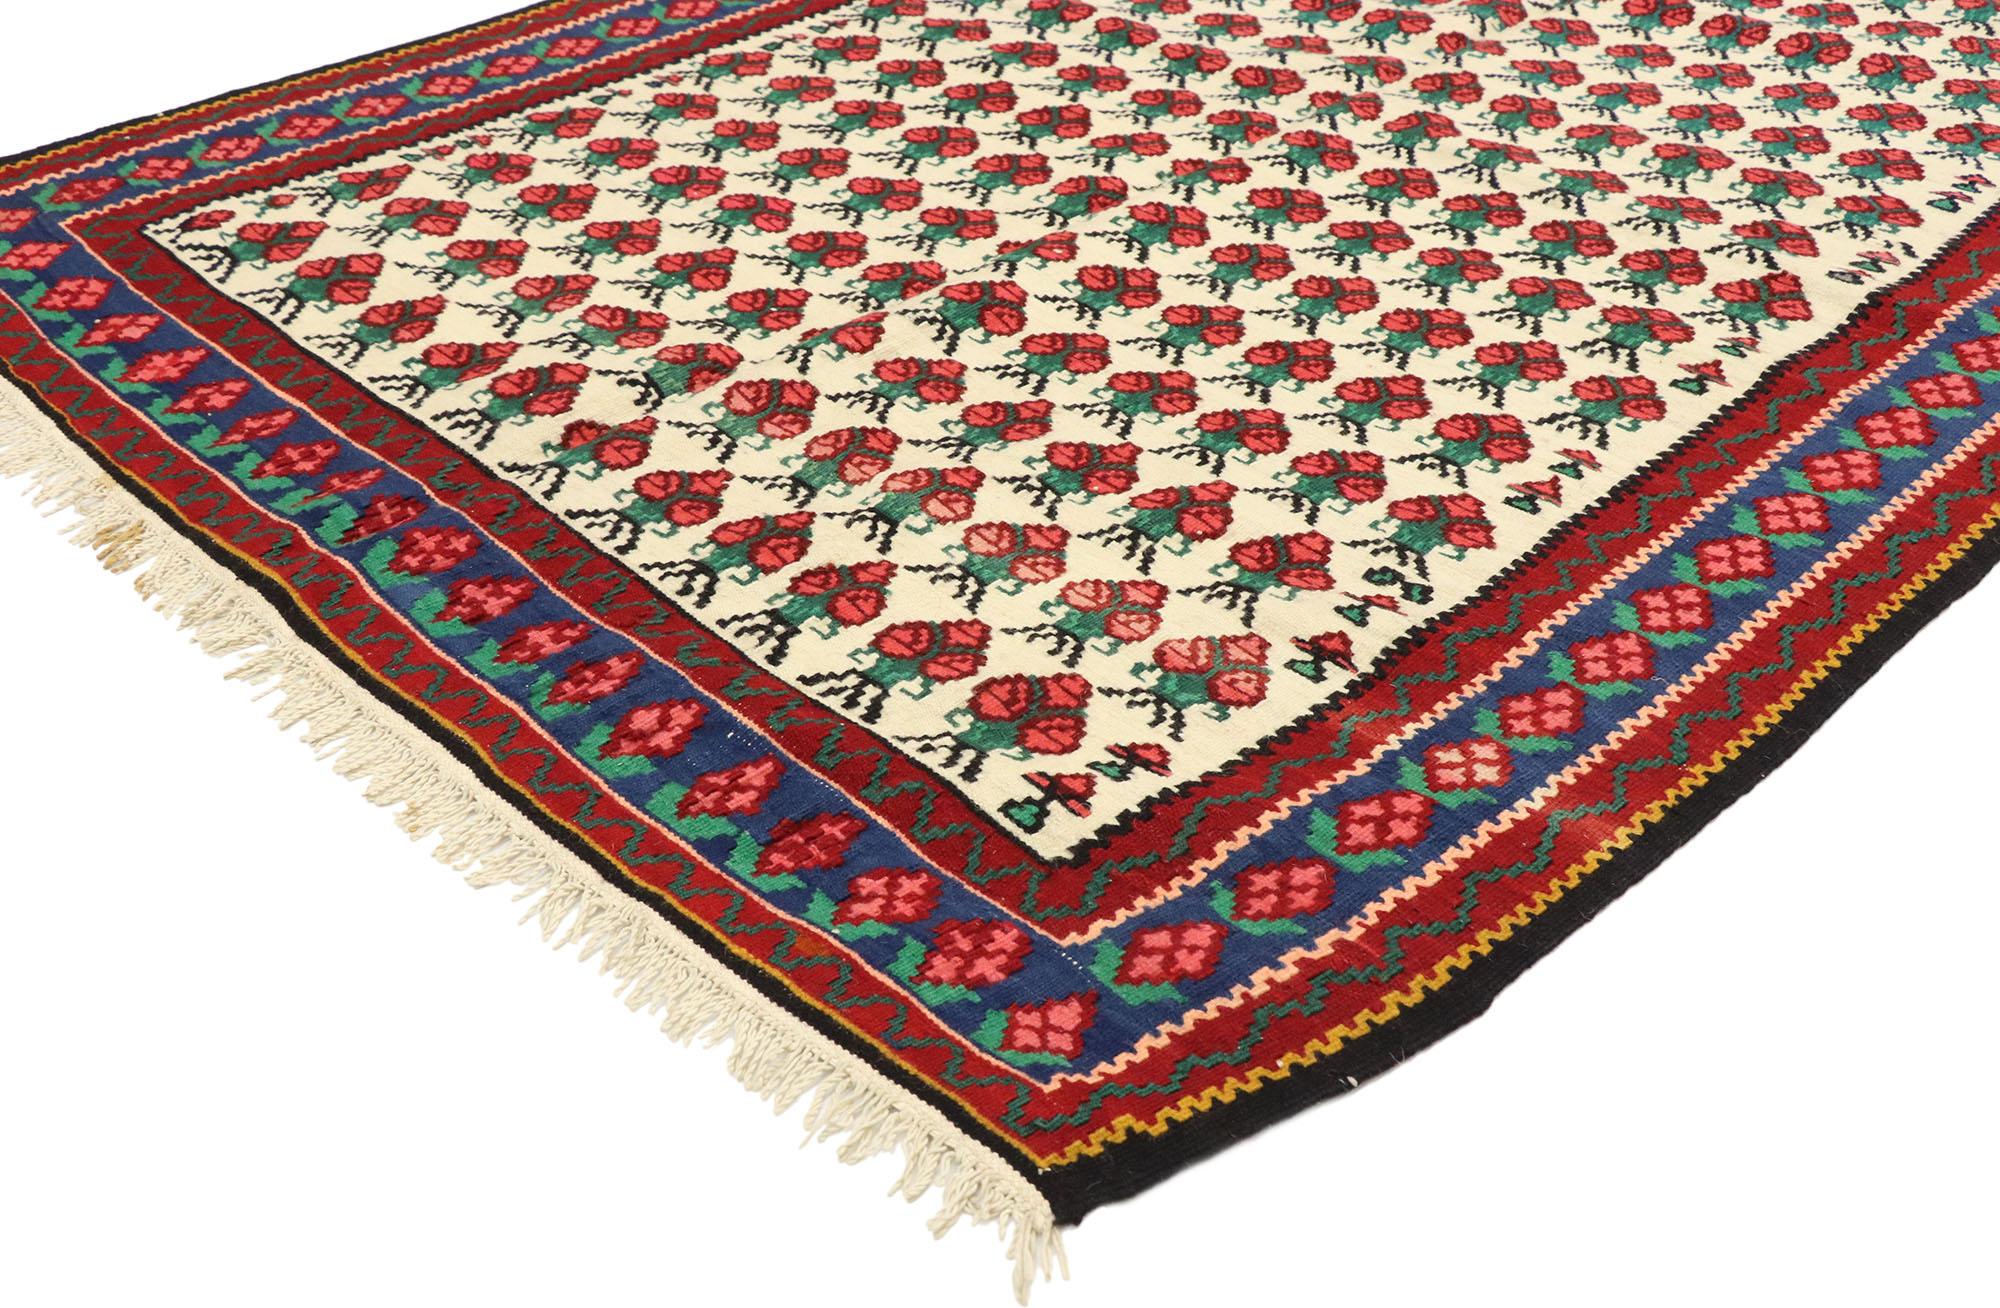 72143, vintage floral Persian Kilim rug with Americana style. With rustic charm and timeless appeal, this handwoven wool vintage Persian floral Kilim accent rug can beautifully blend modern, traditional and contemporary interiors. Cherry red